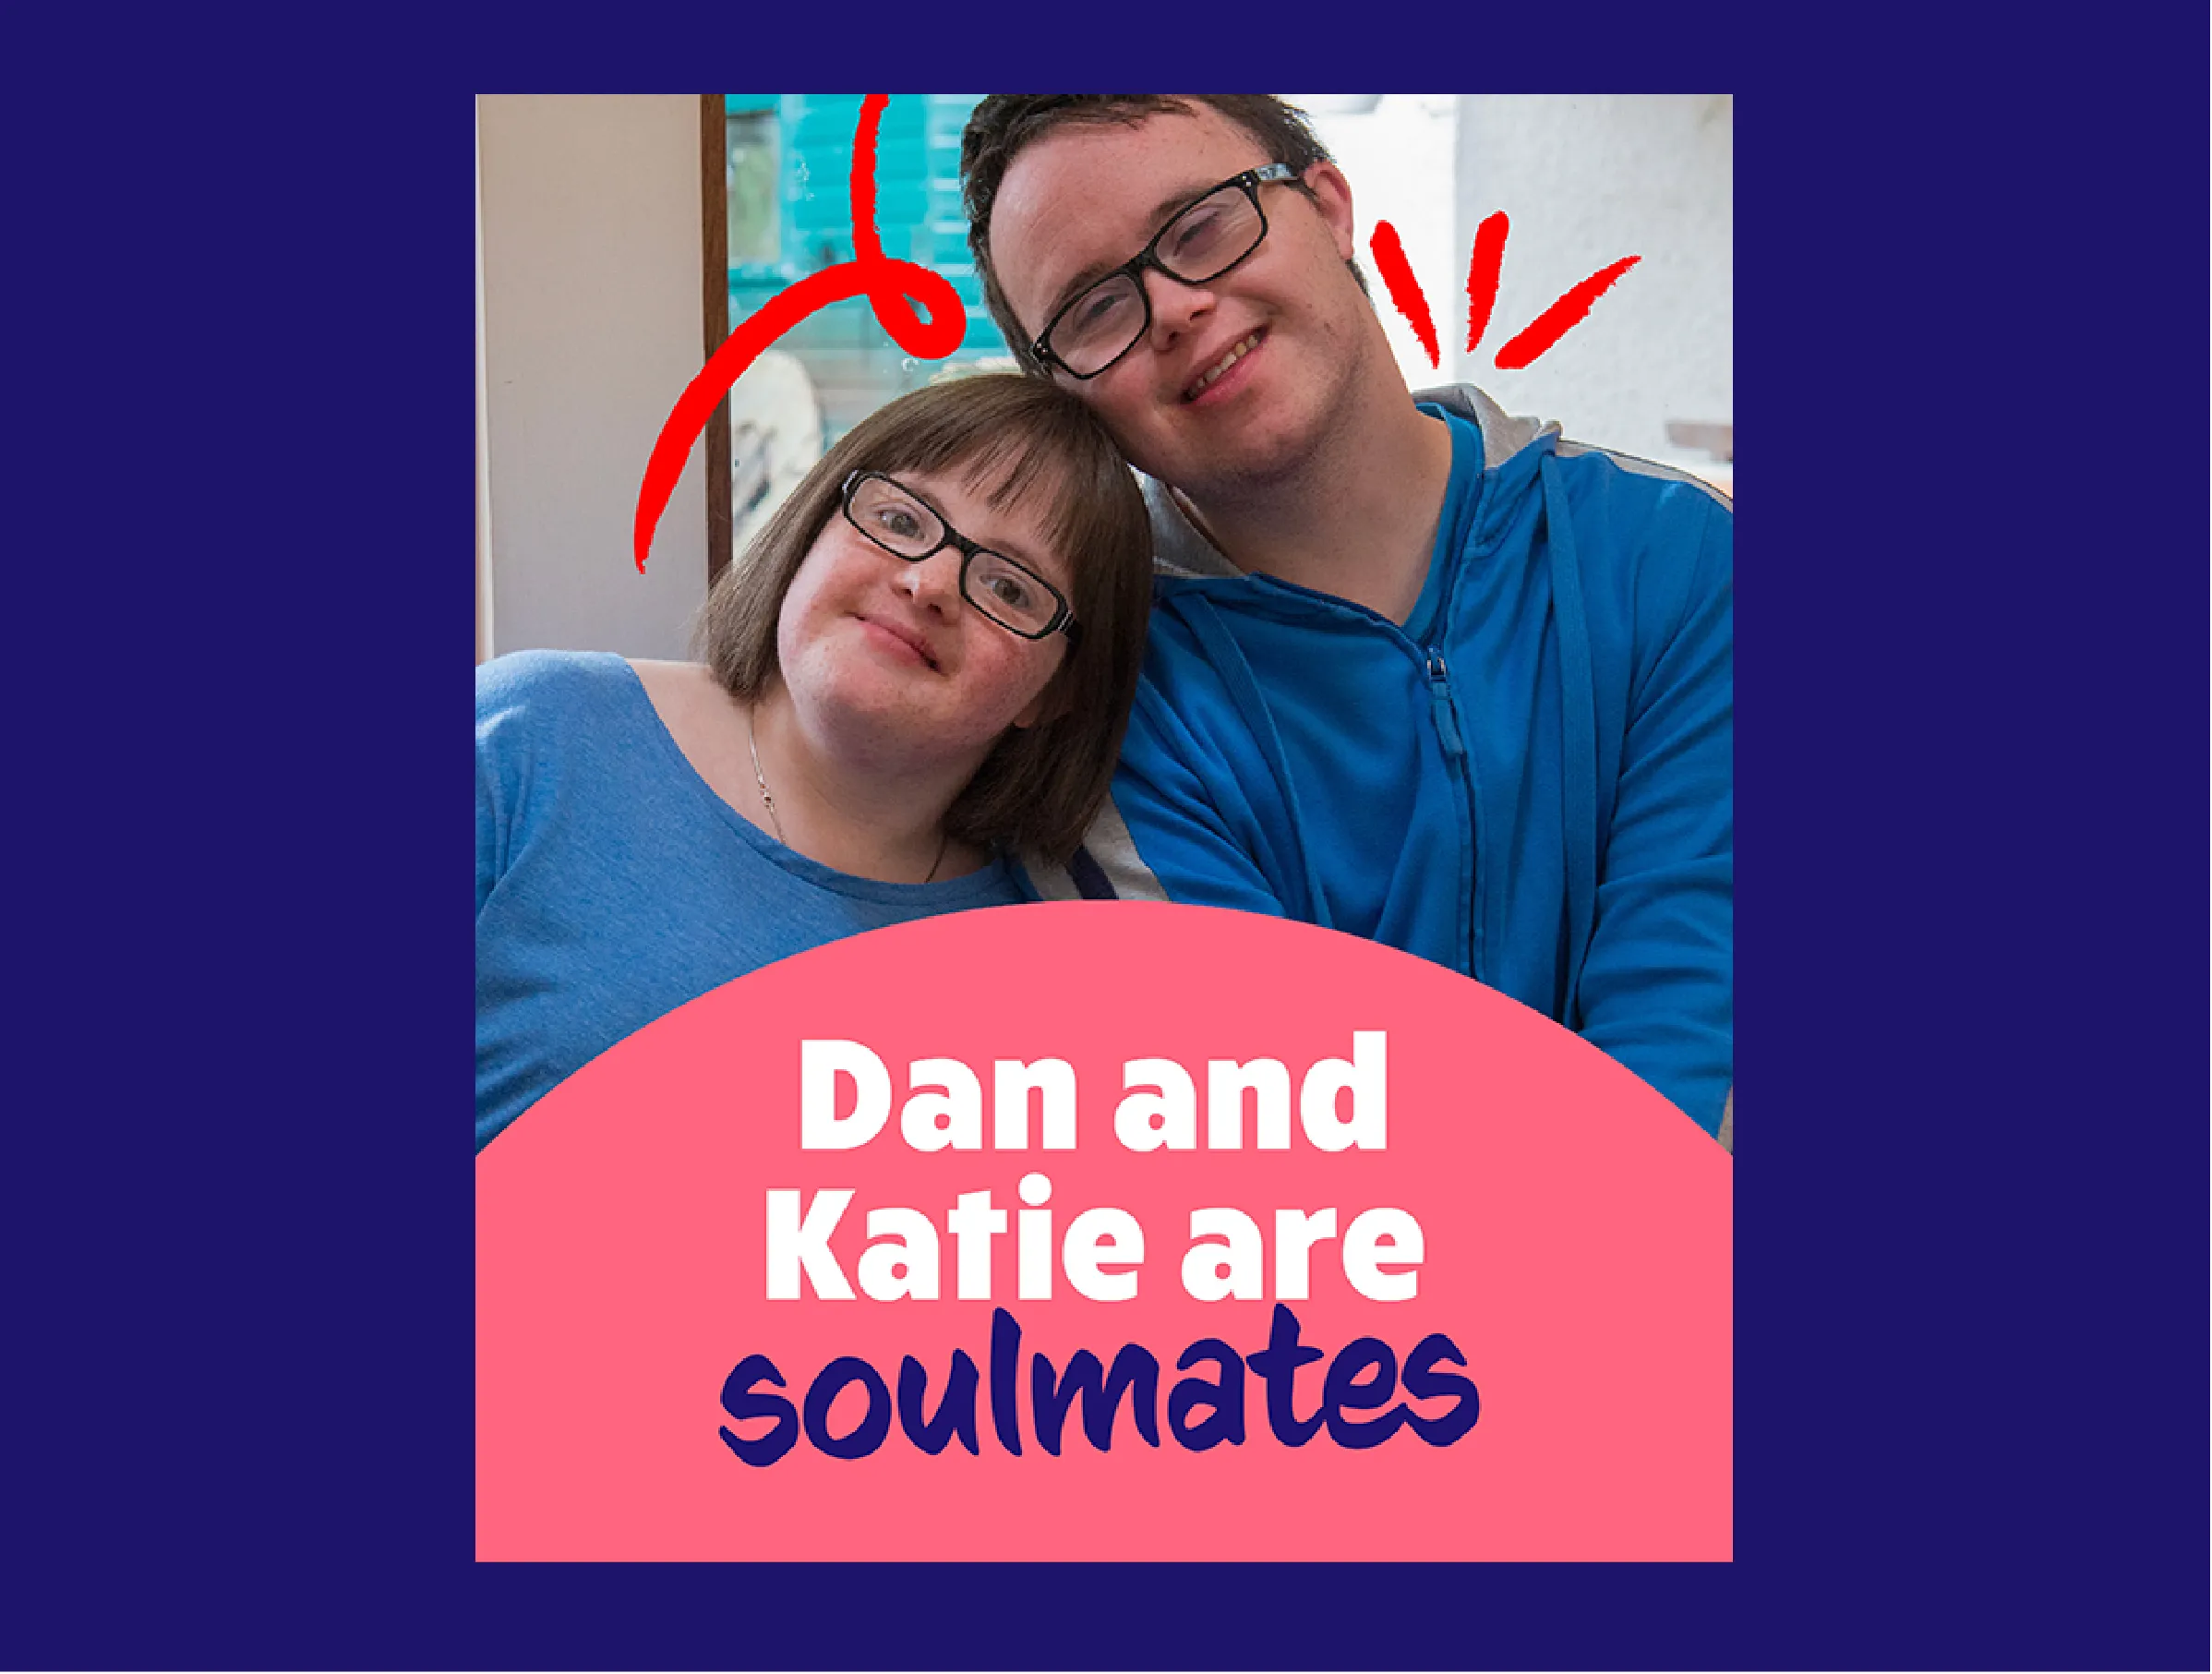 L'arche poster saying 'Dan and Katie are soulmates'